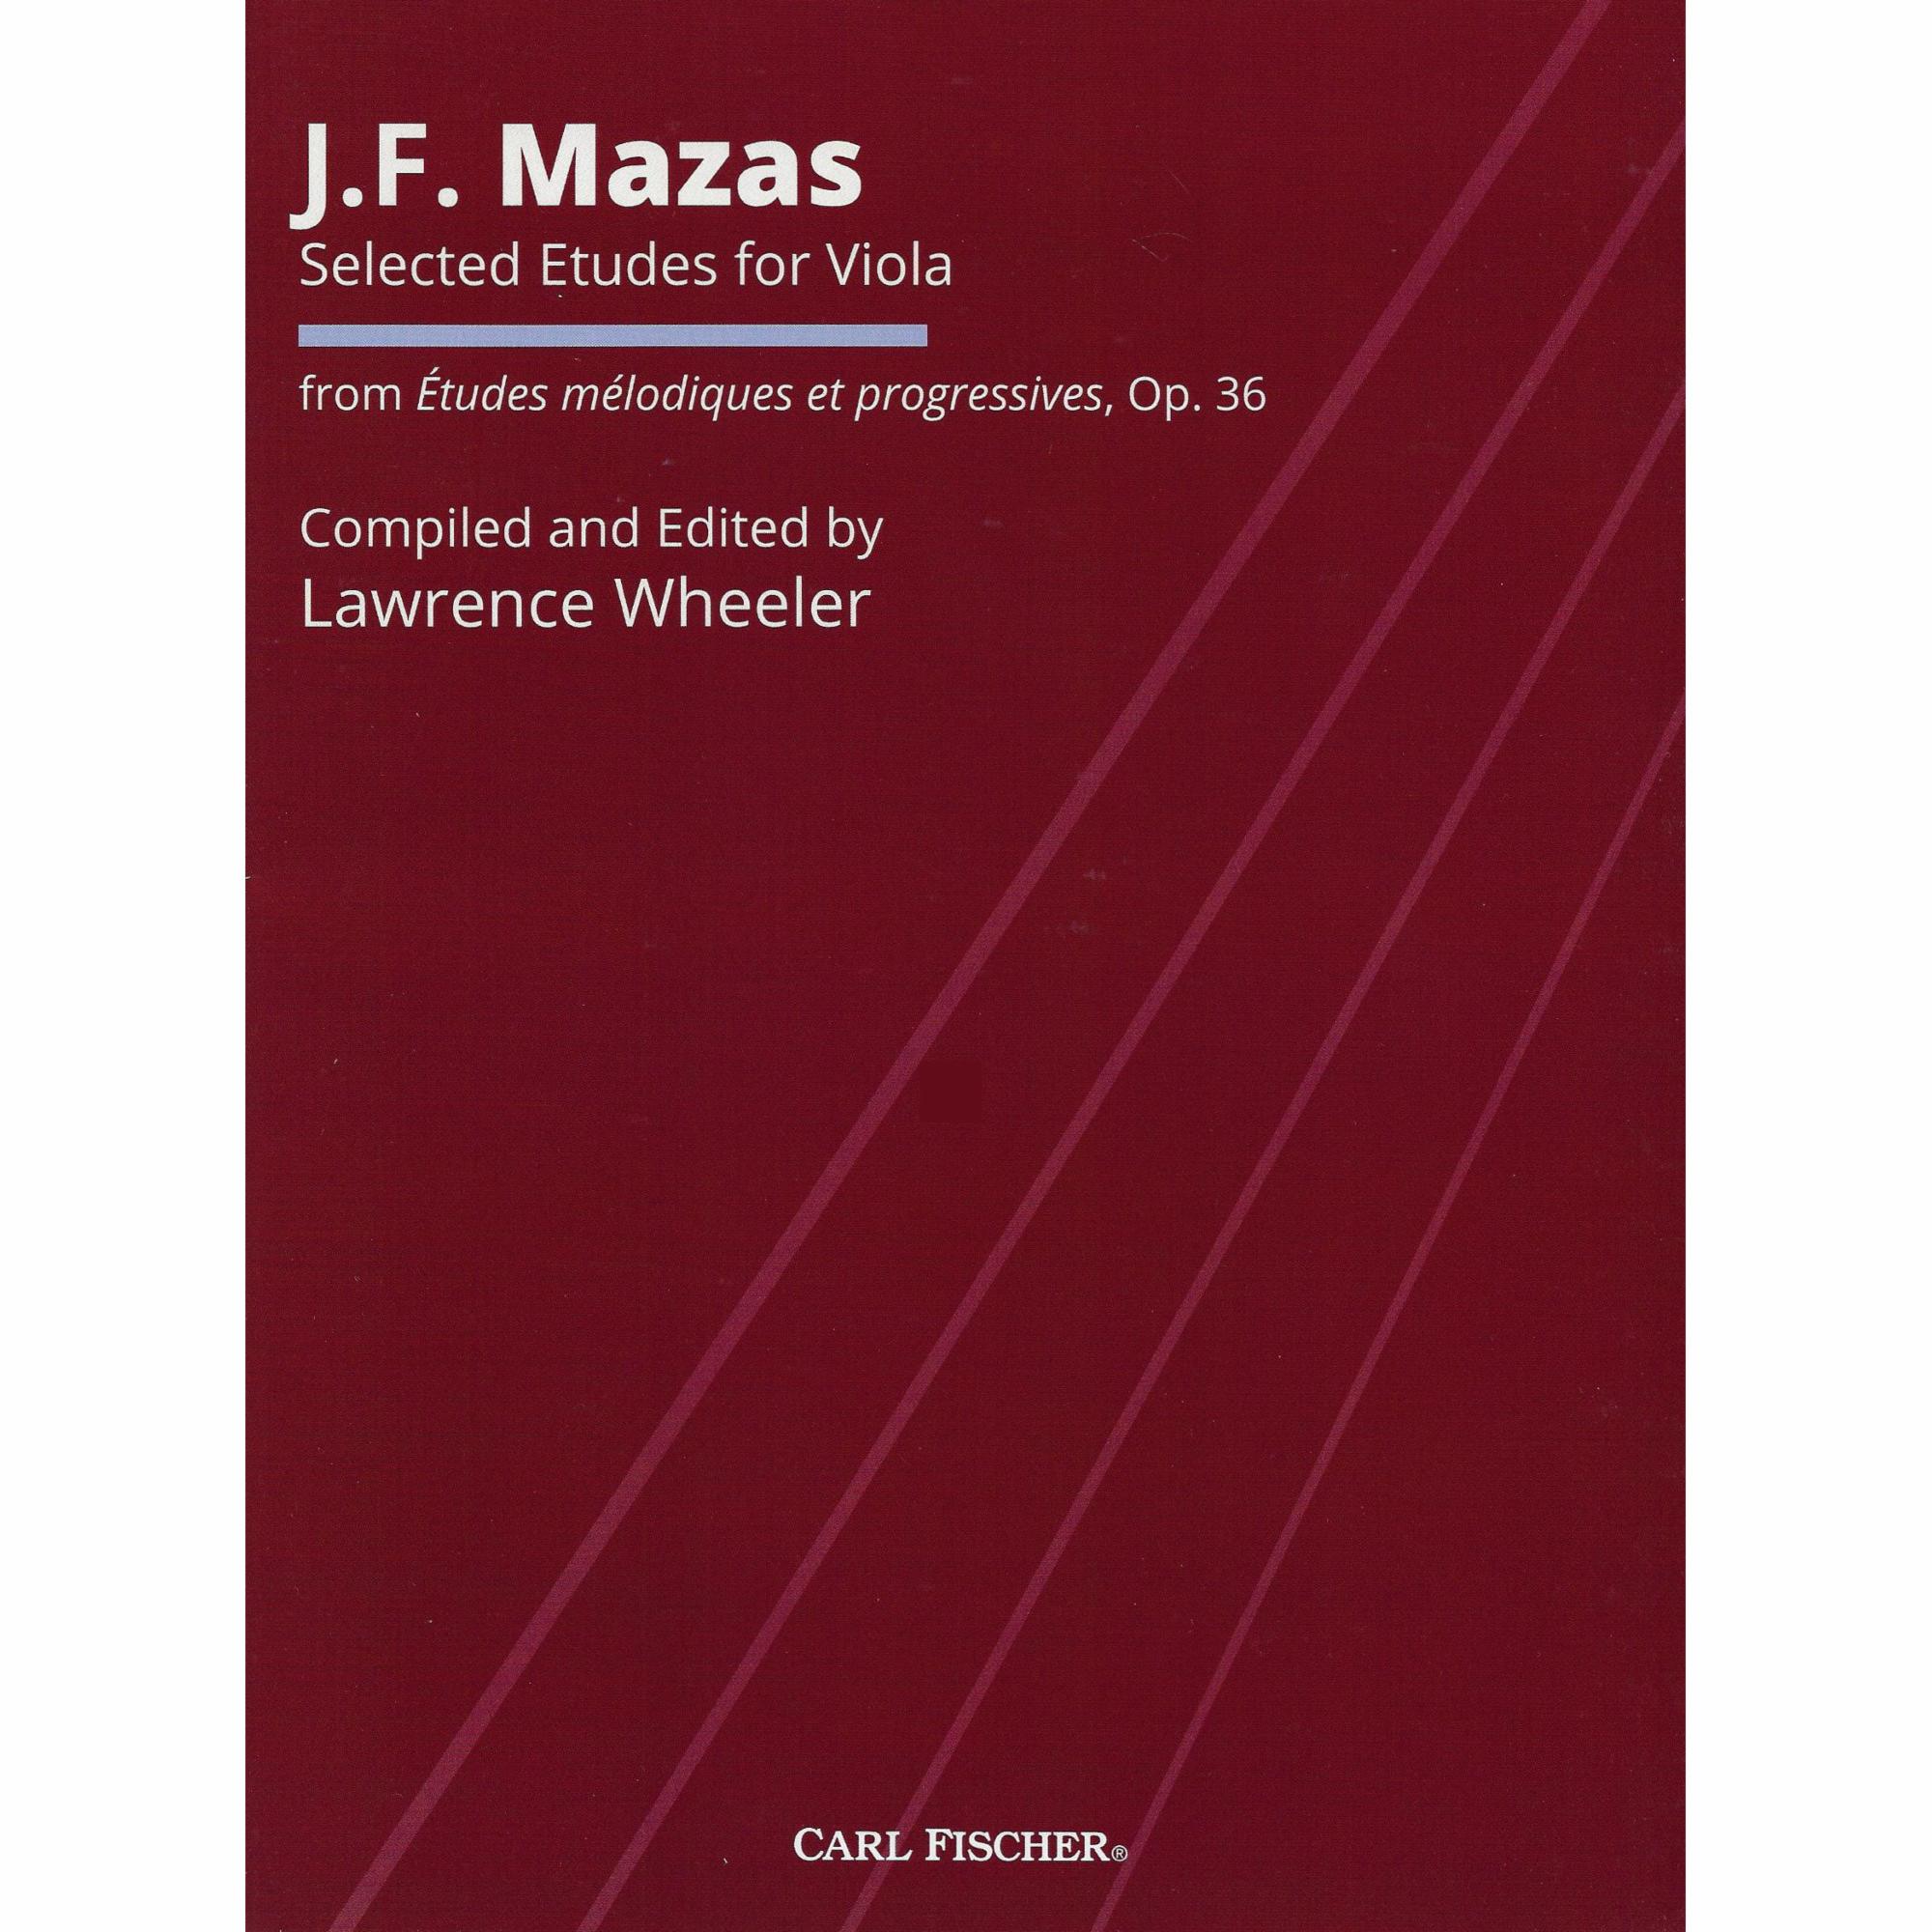 Mazas -- Selected Etudes, from Op. 36 for Viola